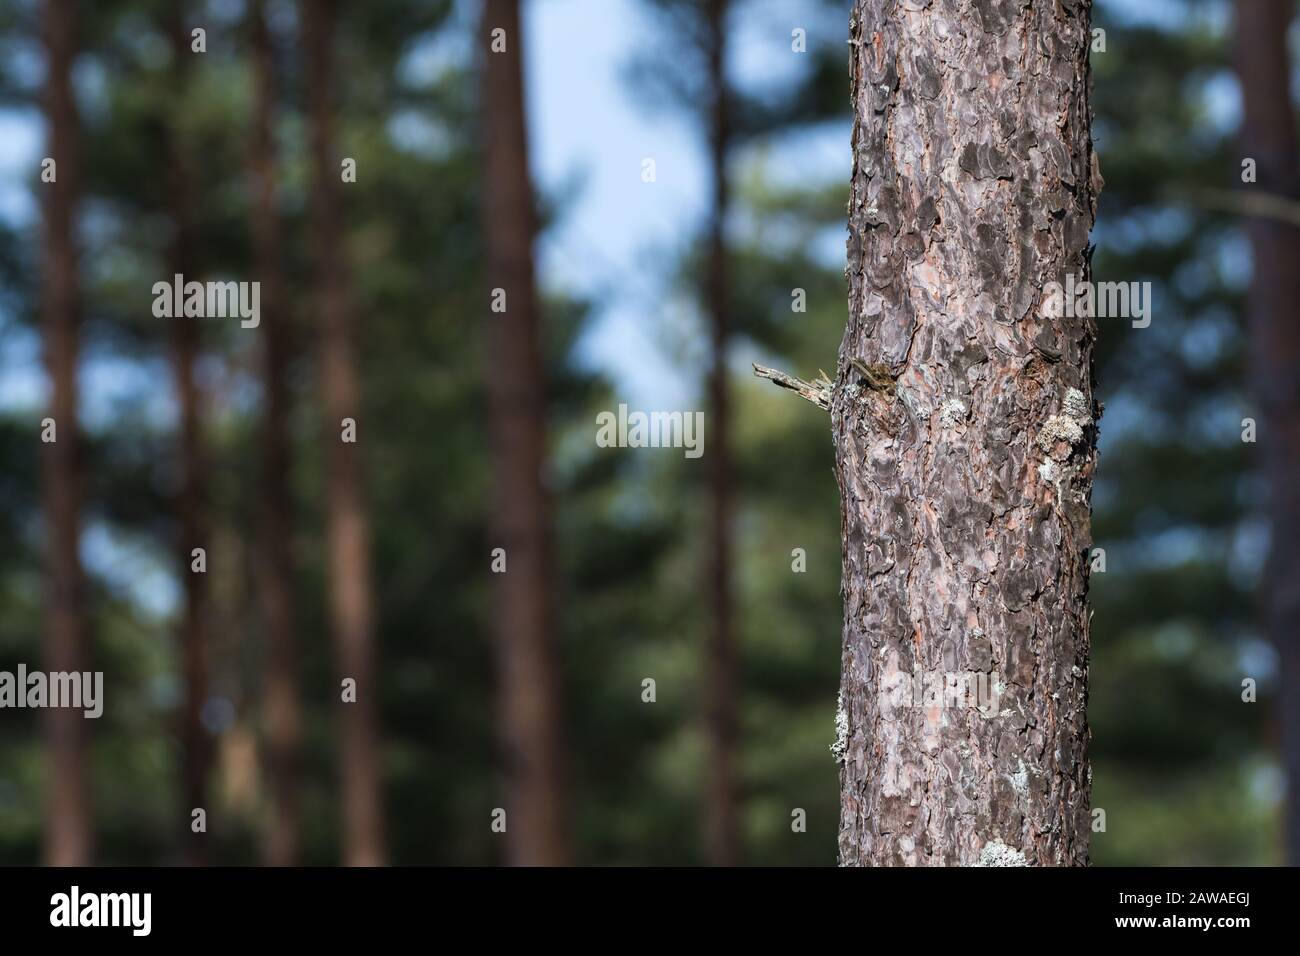 Pine tree trunk close up with a blurred forest in the background Stock Photo